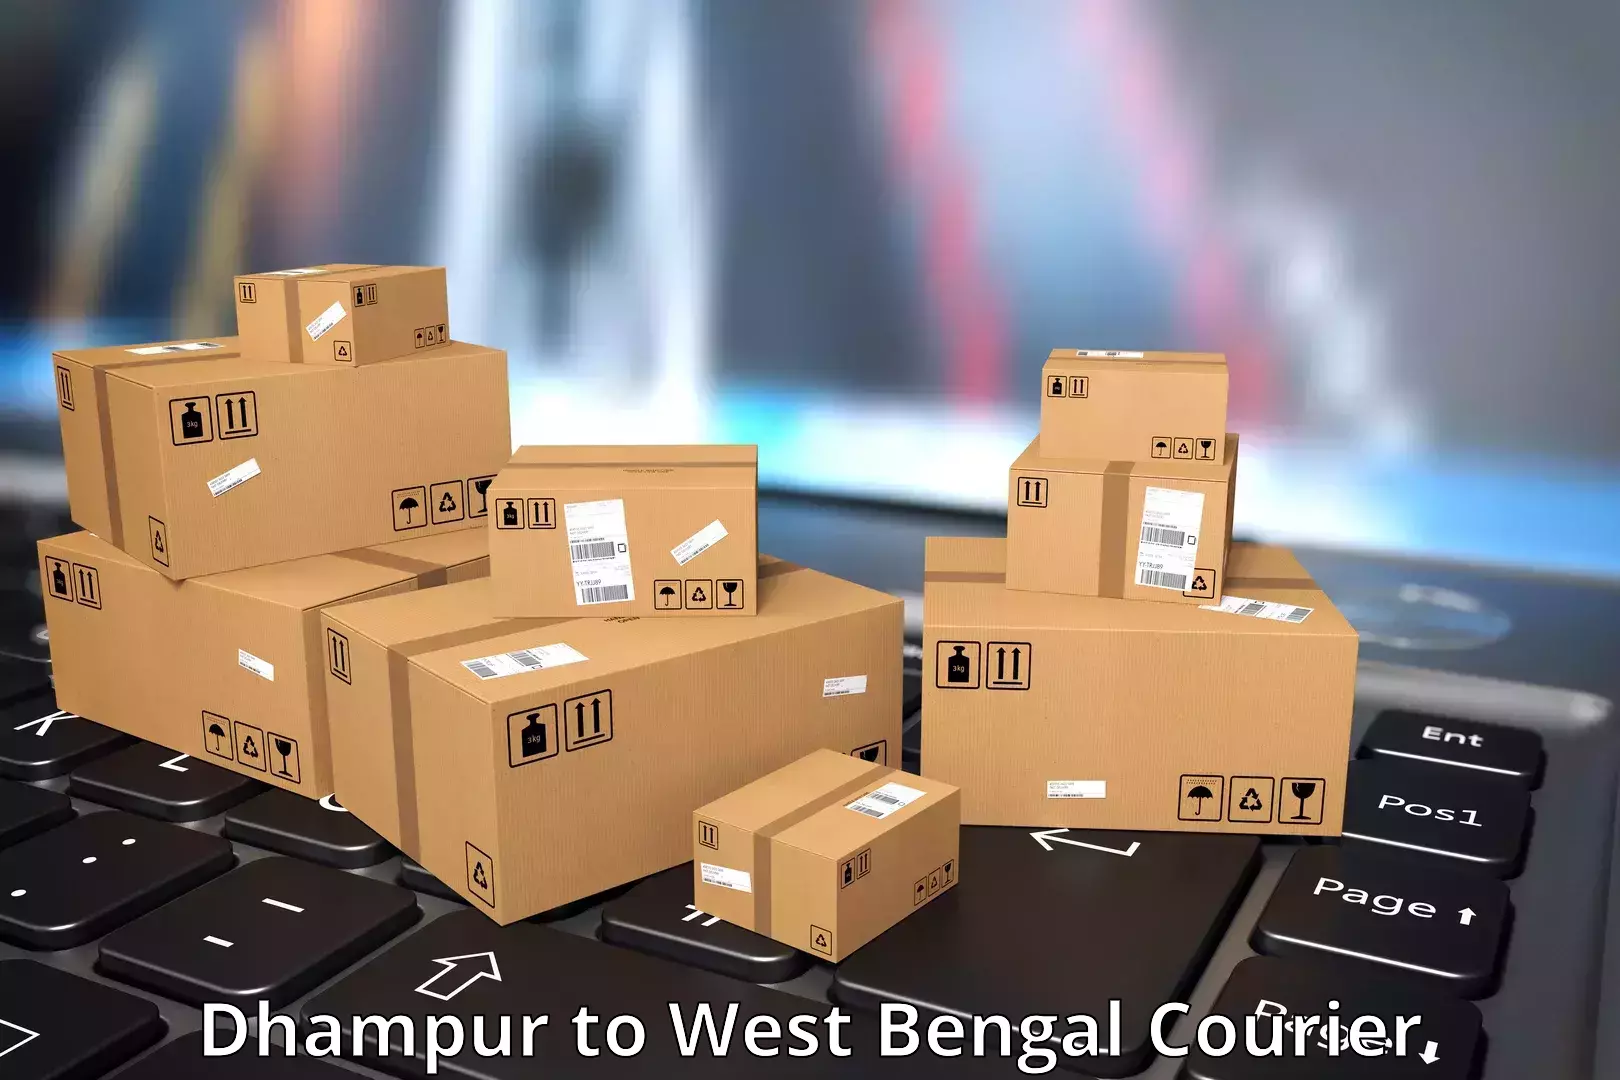 Courier service partnerships Dhampur to Kurseong